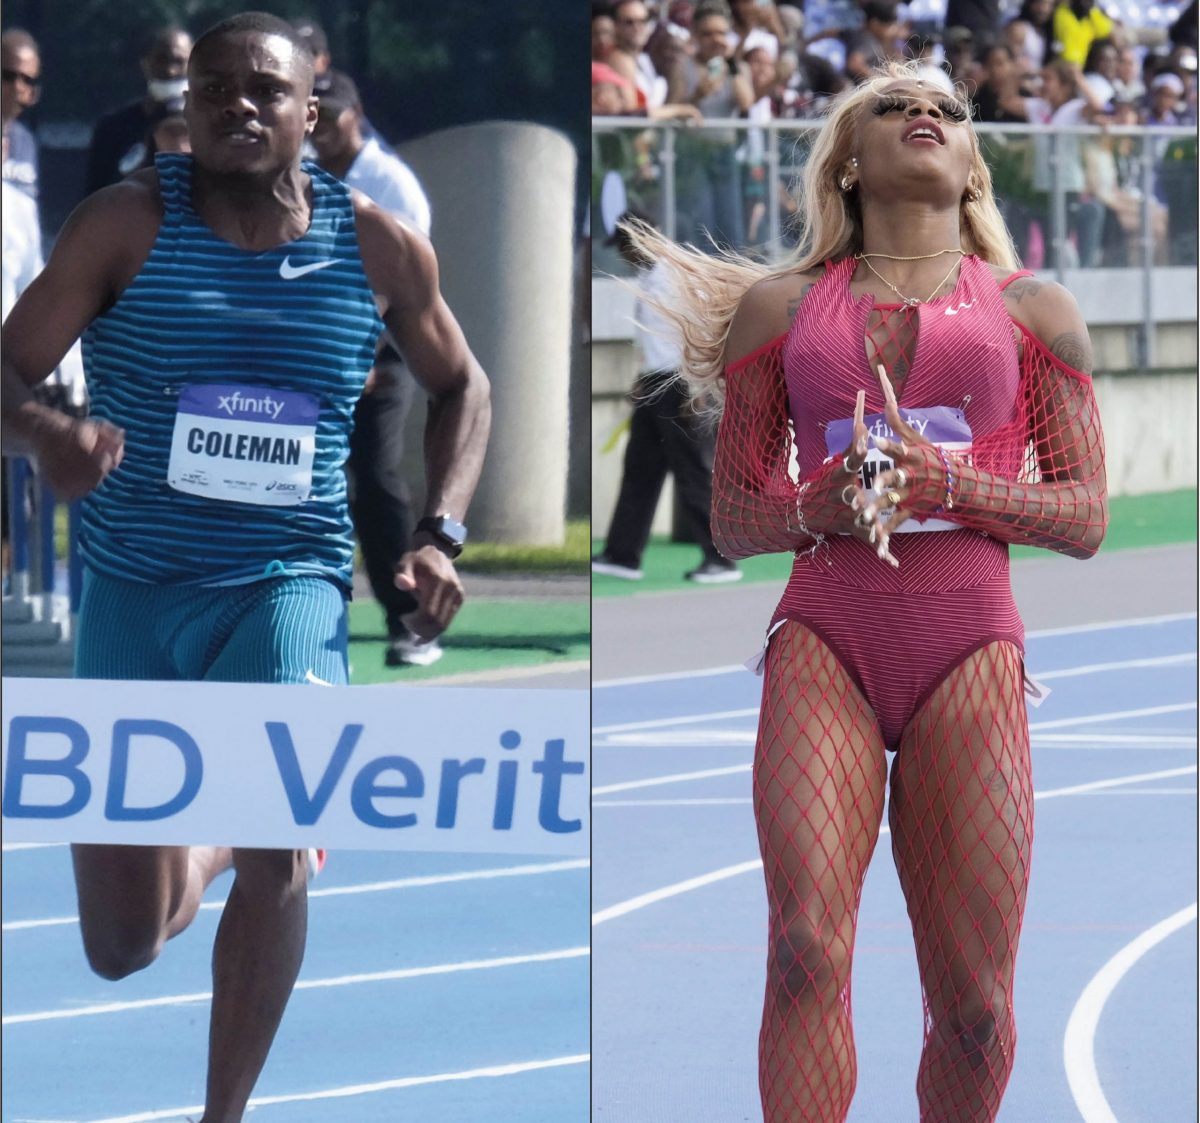 Christian Coleman, left, stormed to victory in the 100m while Sha’carri Richardson won the 200m at the New York City Grand Prix event yesterday.